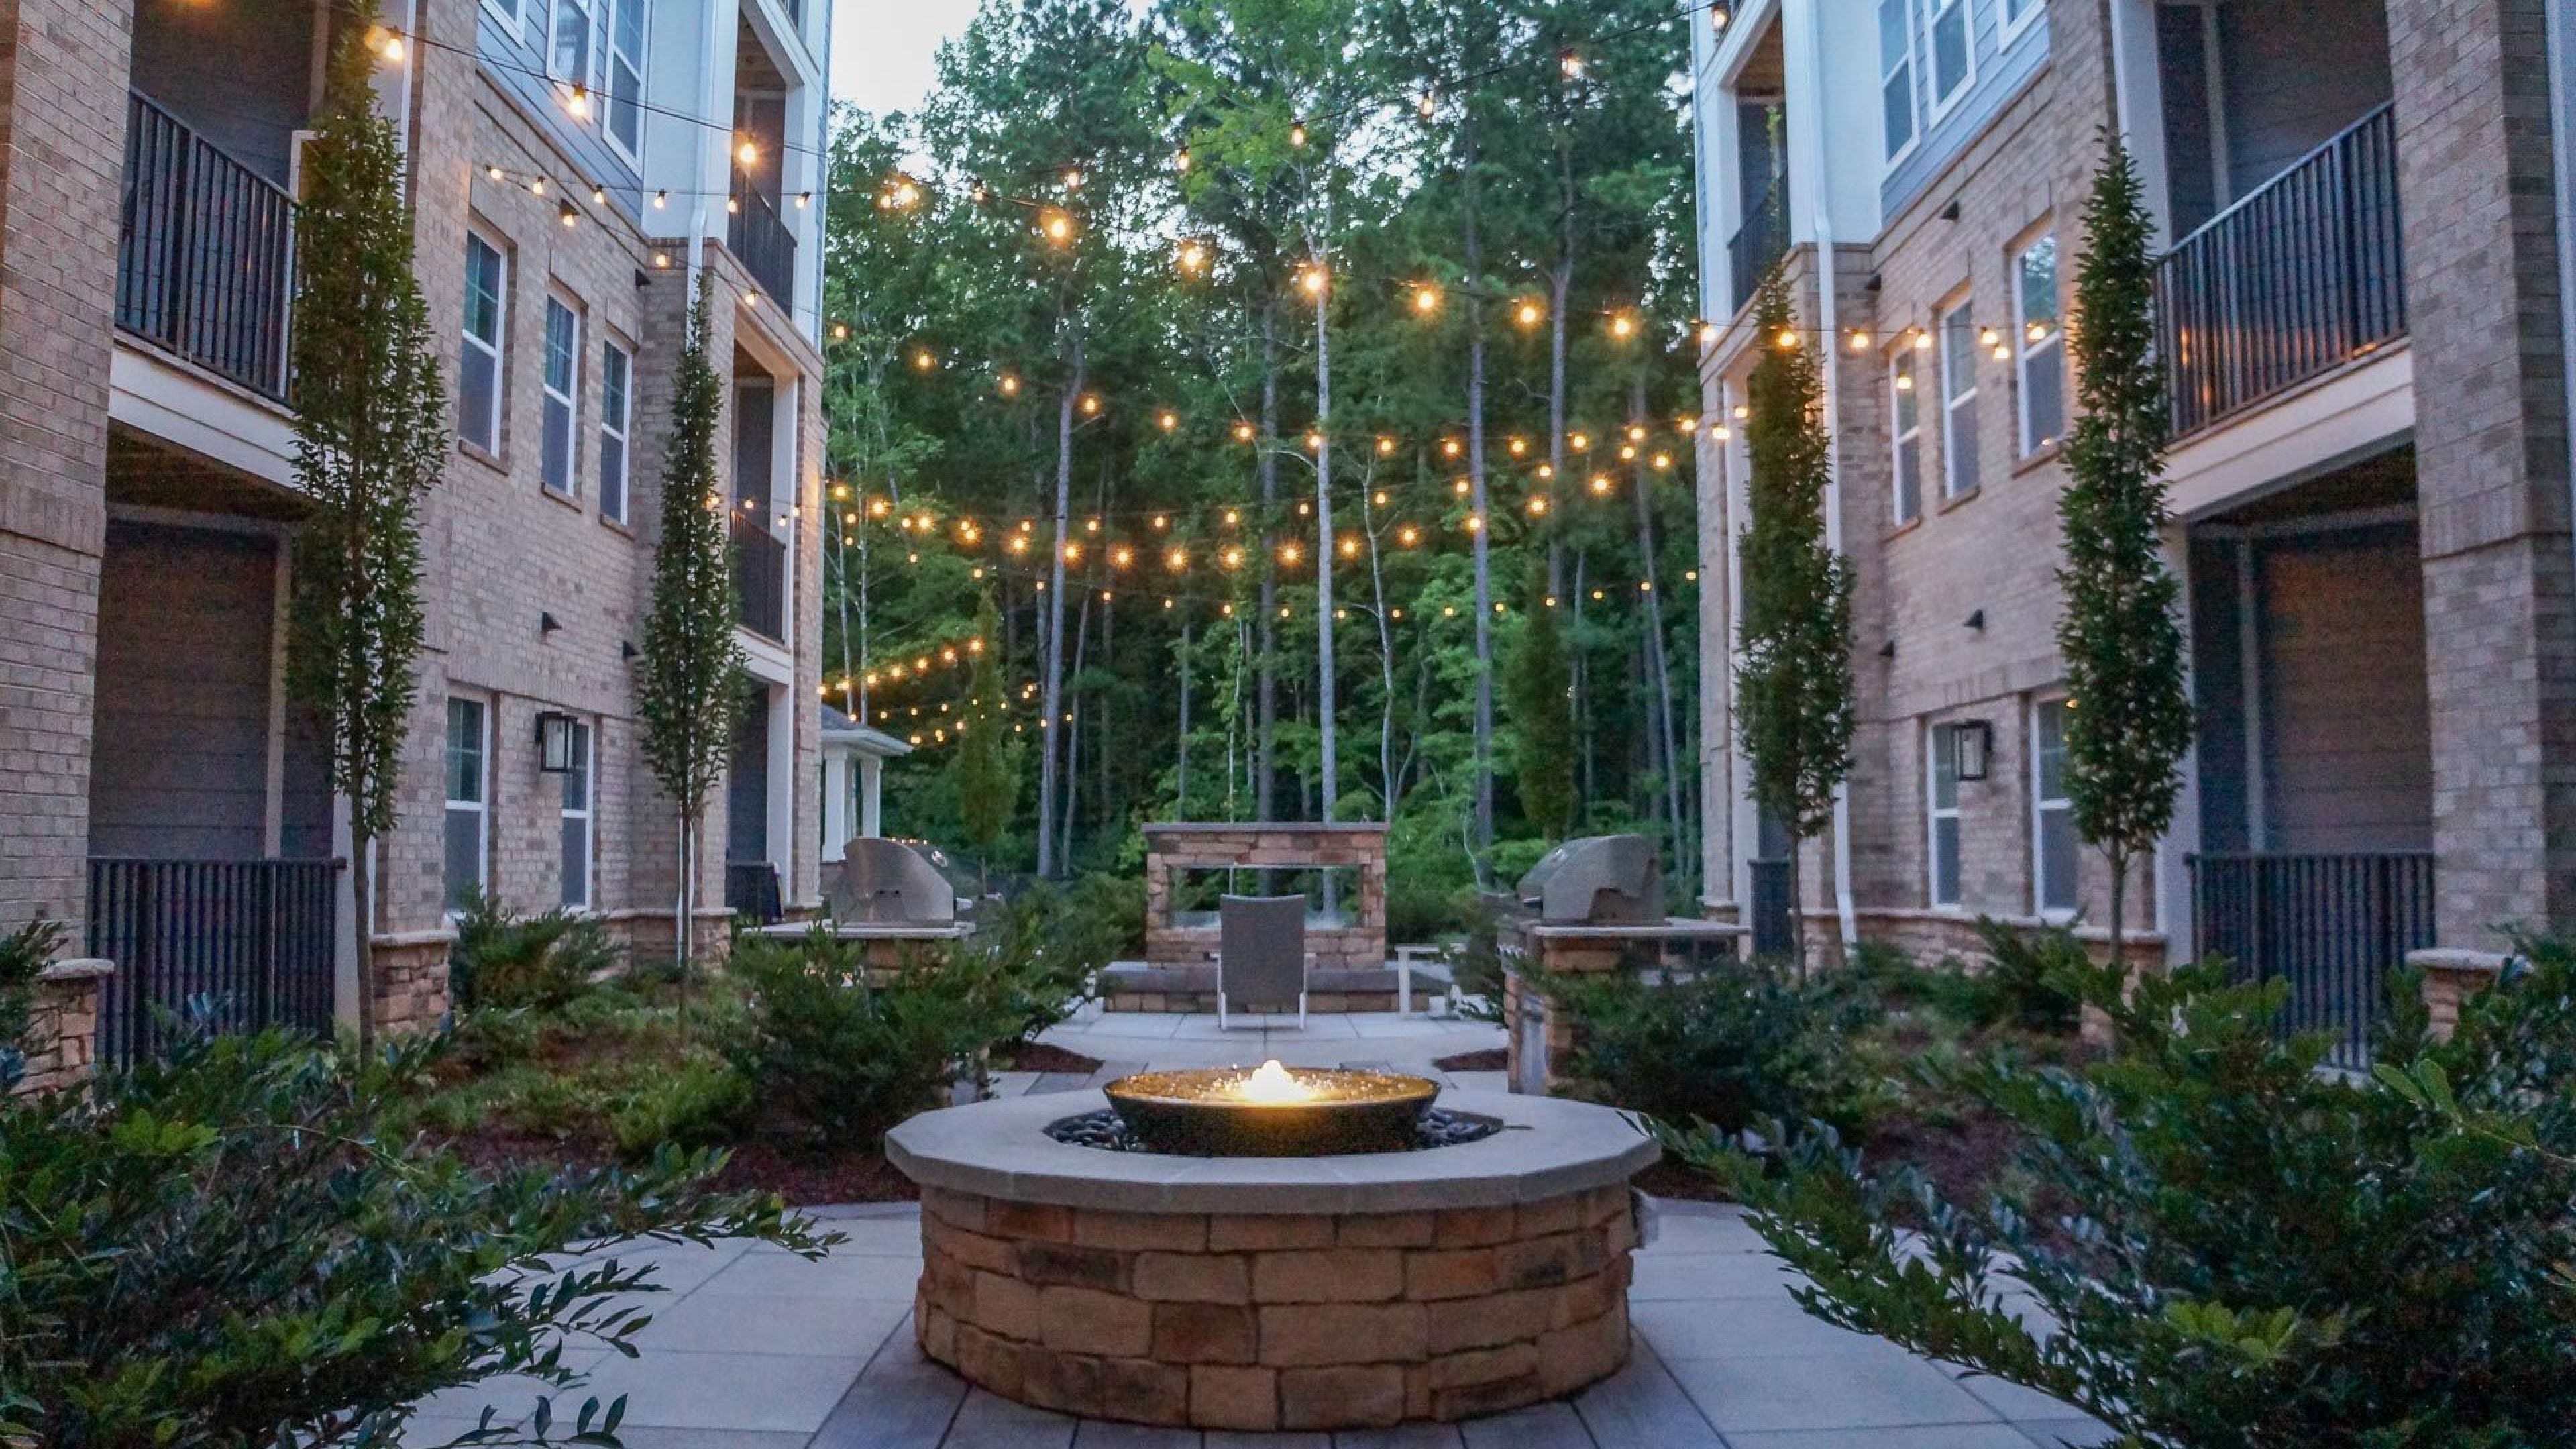 Hawthorne at Parkside beautiful outdoor courtyard amenity with a grill area and firepit, overhanging lights drape across the courtyard